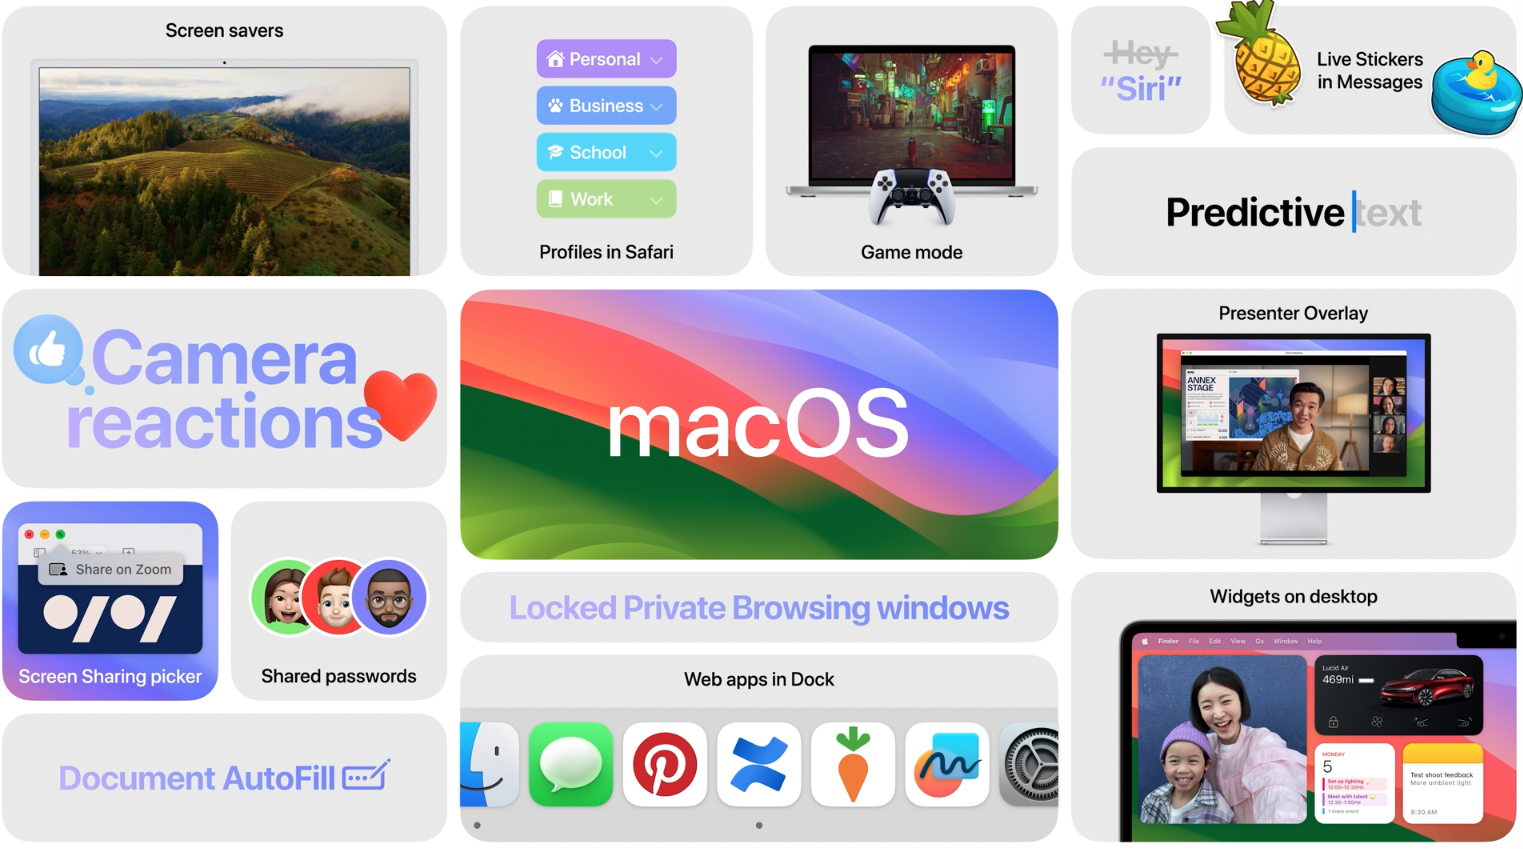 Apple Spring Event: Date, rumors, new Macs, iPads, and more